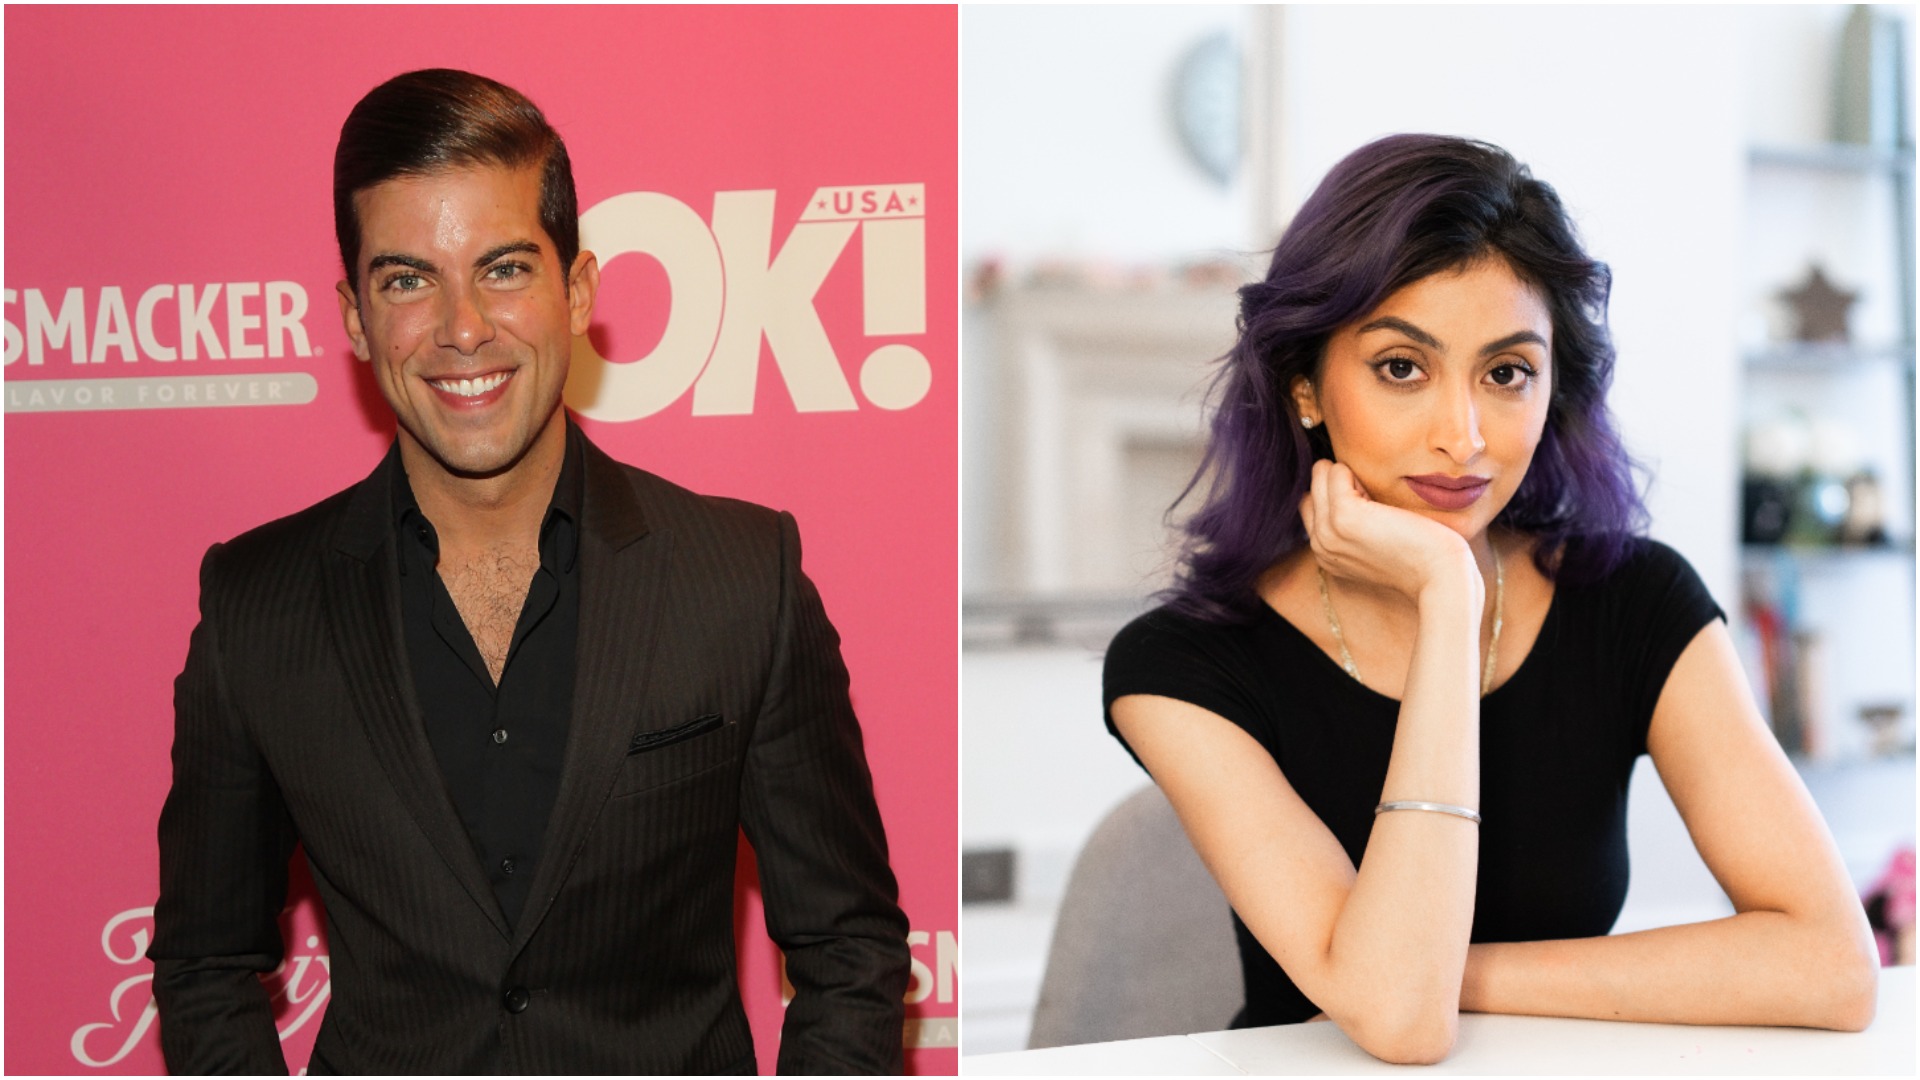 Luis D. Ortiz from 'Million Dollar Listing' wearing a black suit posing at a red carpet event. Nikita Singh poses for a headshot. 